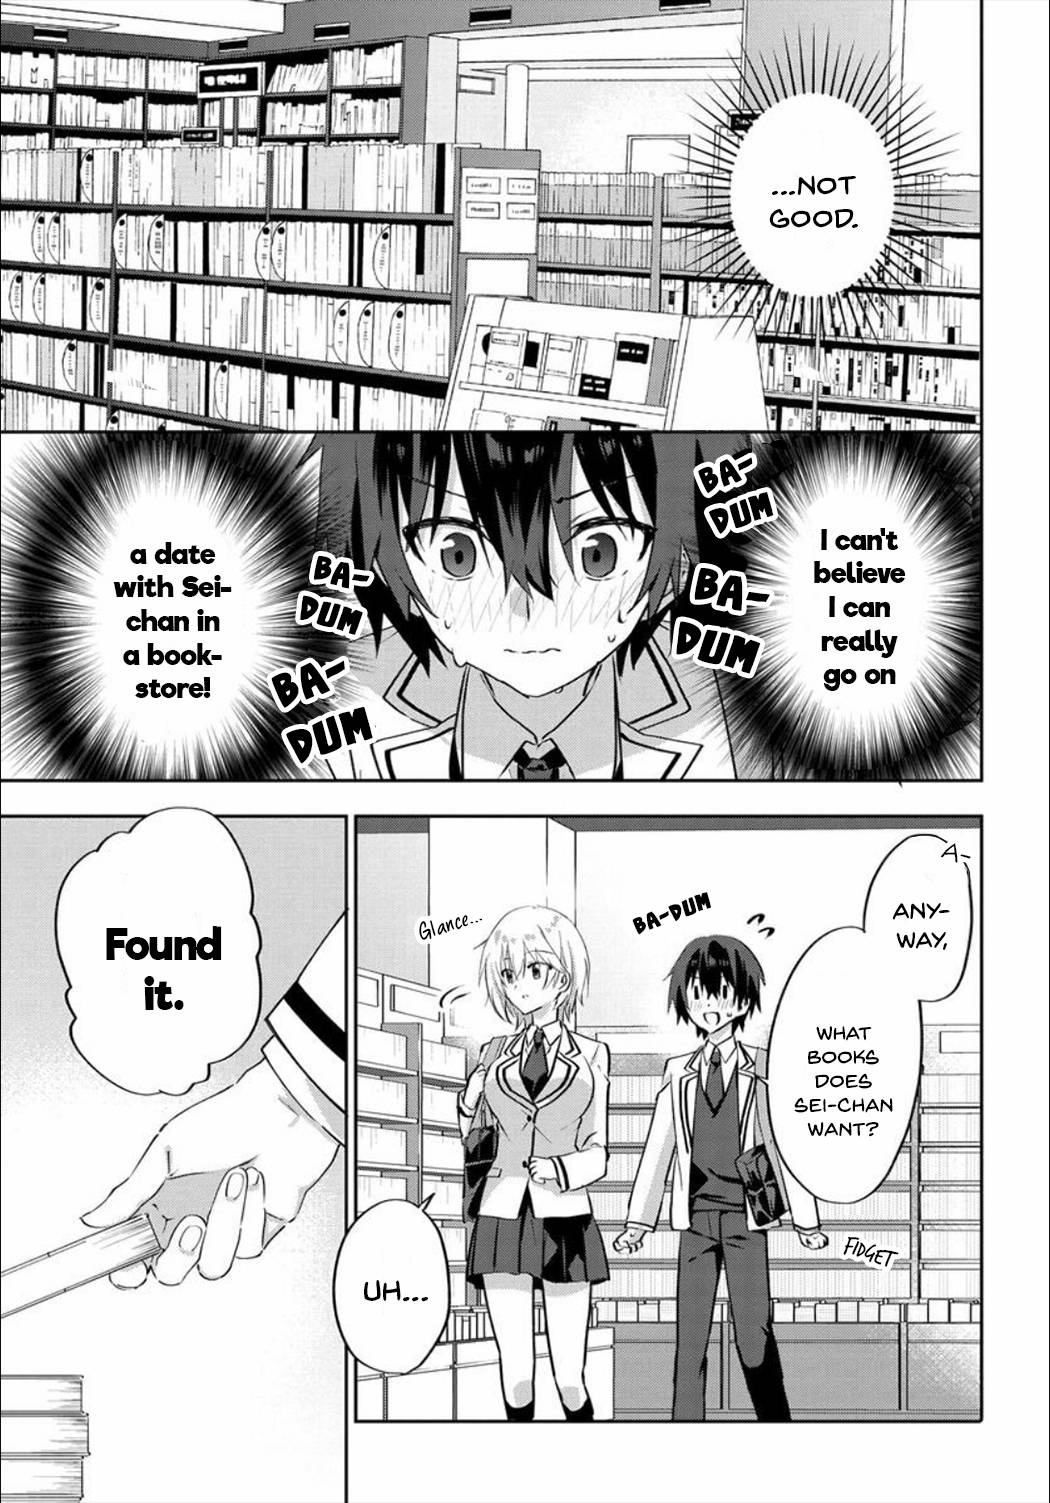 Since I’Ve Entered The World Of Romantic Comedy Manga, I’Ll Do My Best To Make The Losing Heroine Happy - chapter 5.1 - #1